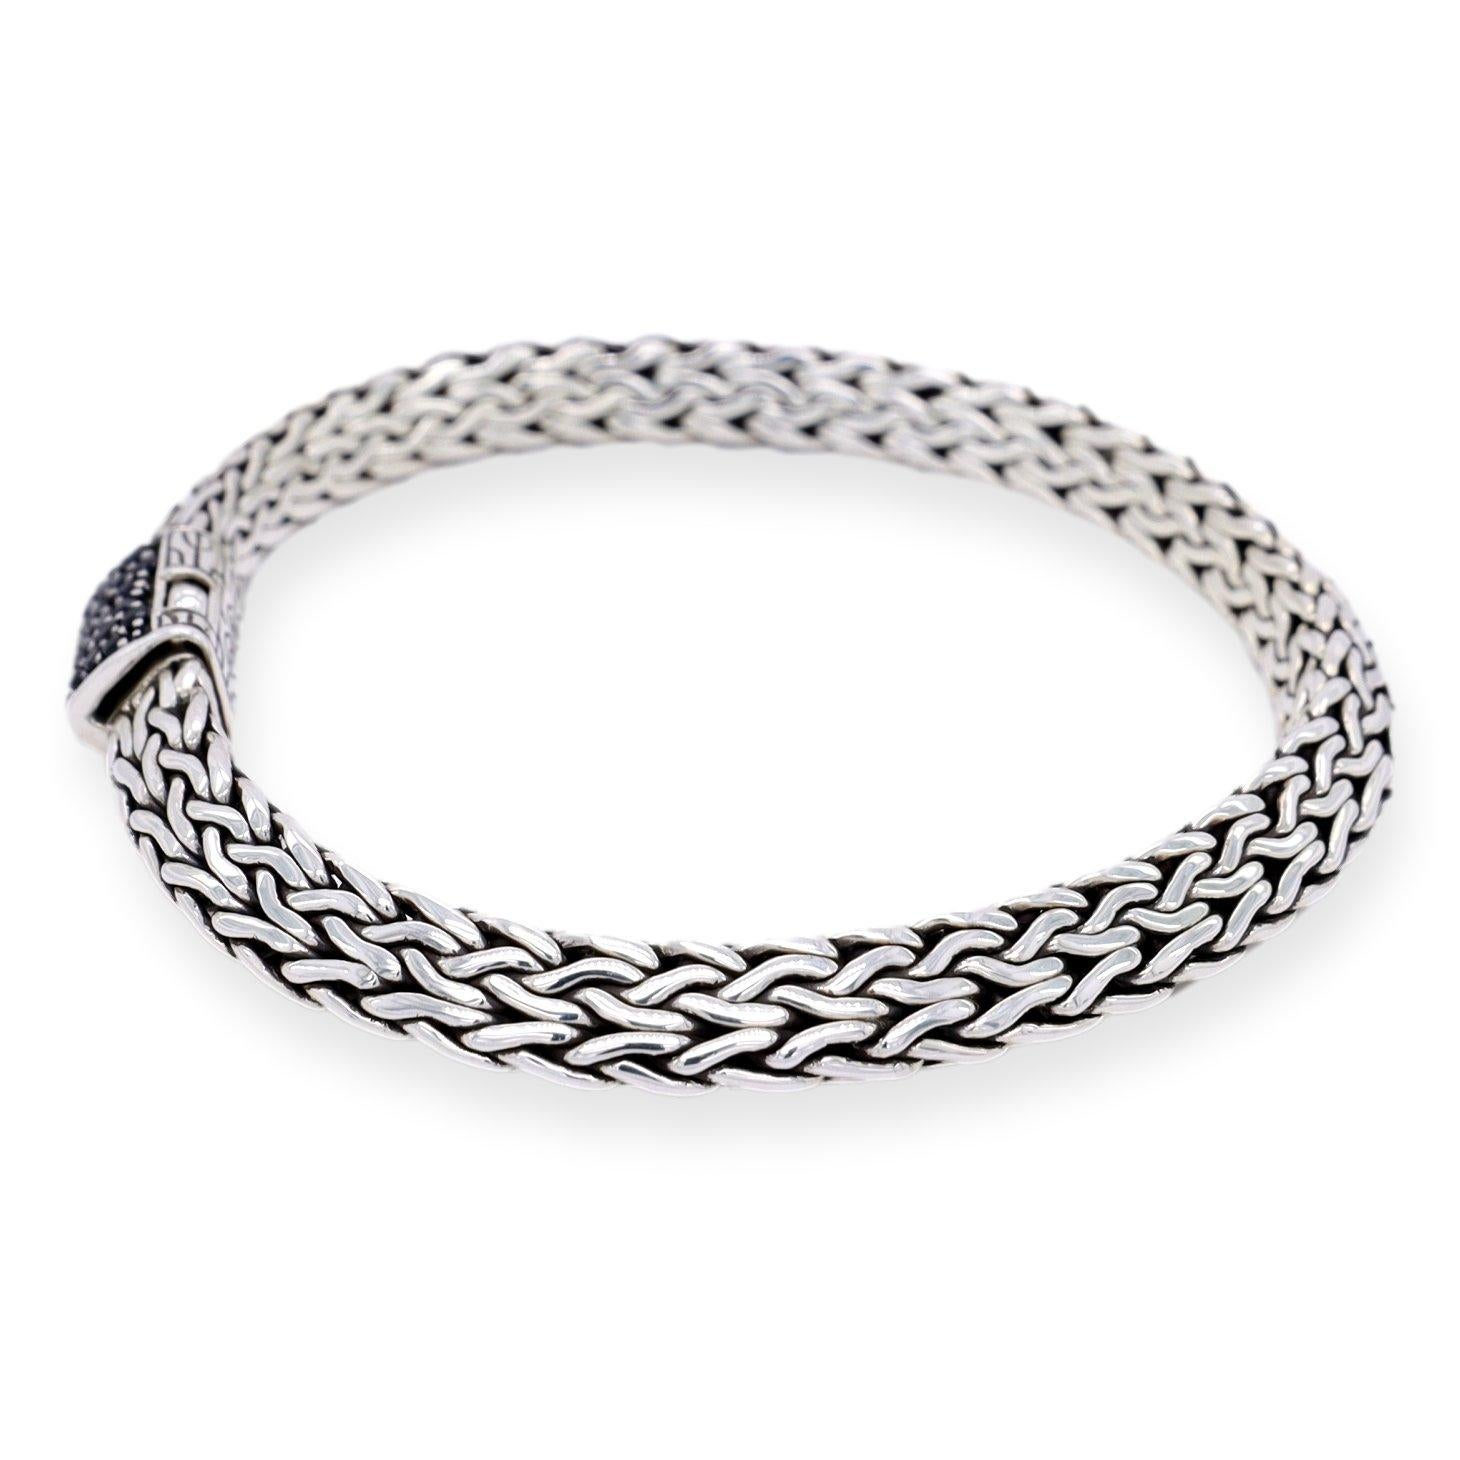 The John Hardy Sterling Silver Black Sapphire Tiga Chain Bracelet is a beautiful and stylish piece of jewelry made from high quality sterling silver. The bracelet features black treated sapphires set in a sleek 6.5mm Tiga chain design. It is 7.25